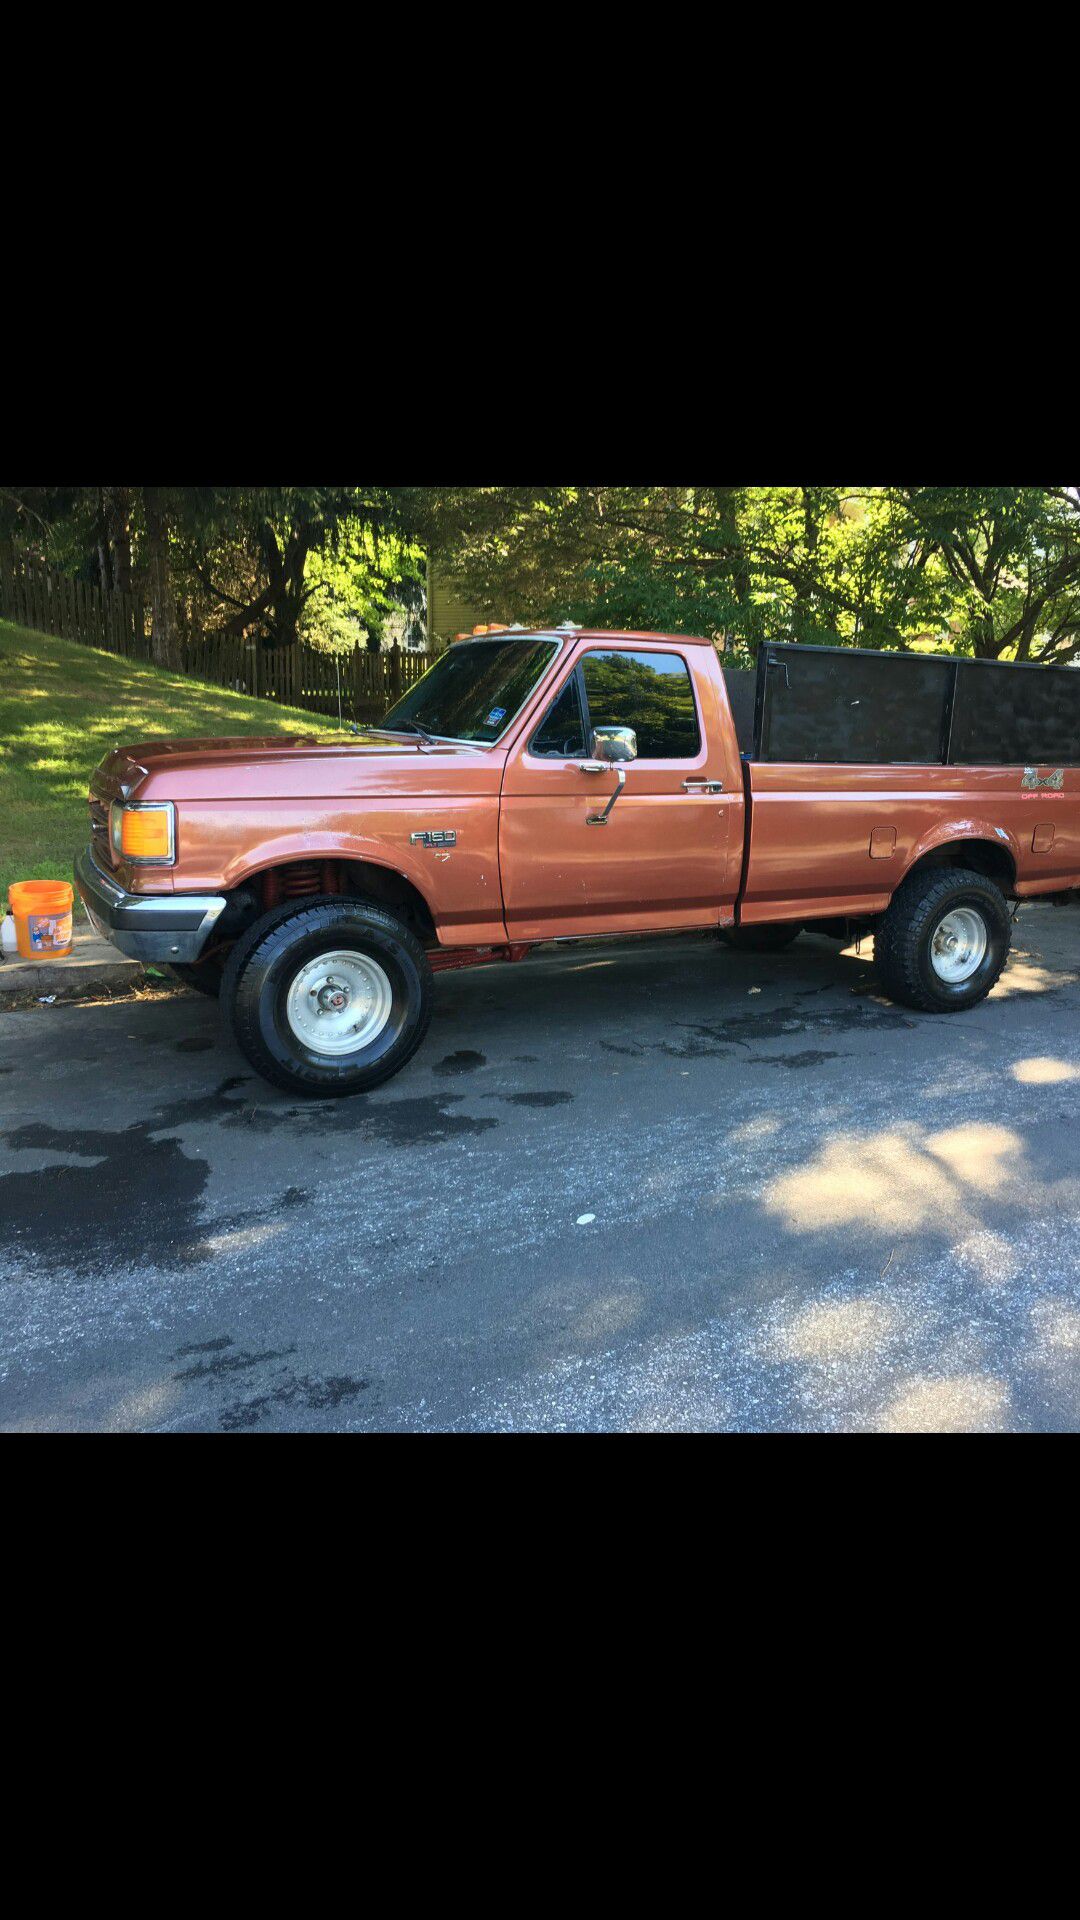 1988 Ford pickup v6 stick shift rebuilt motor all I need is a exhaust system good work truck